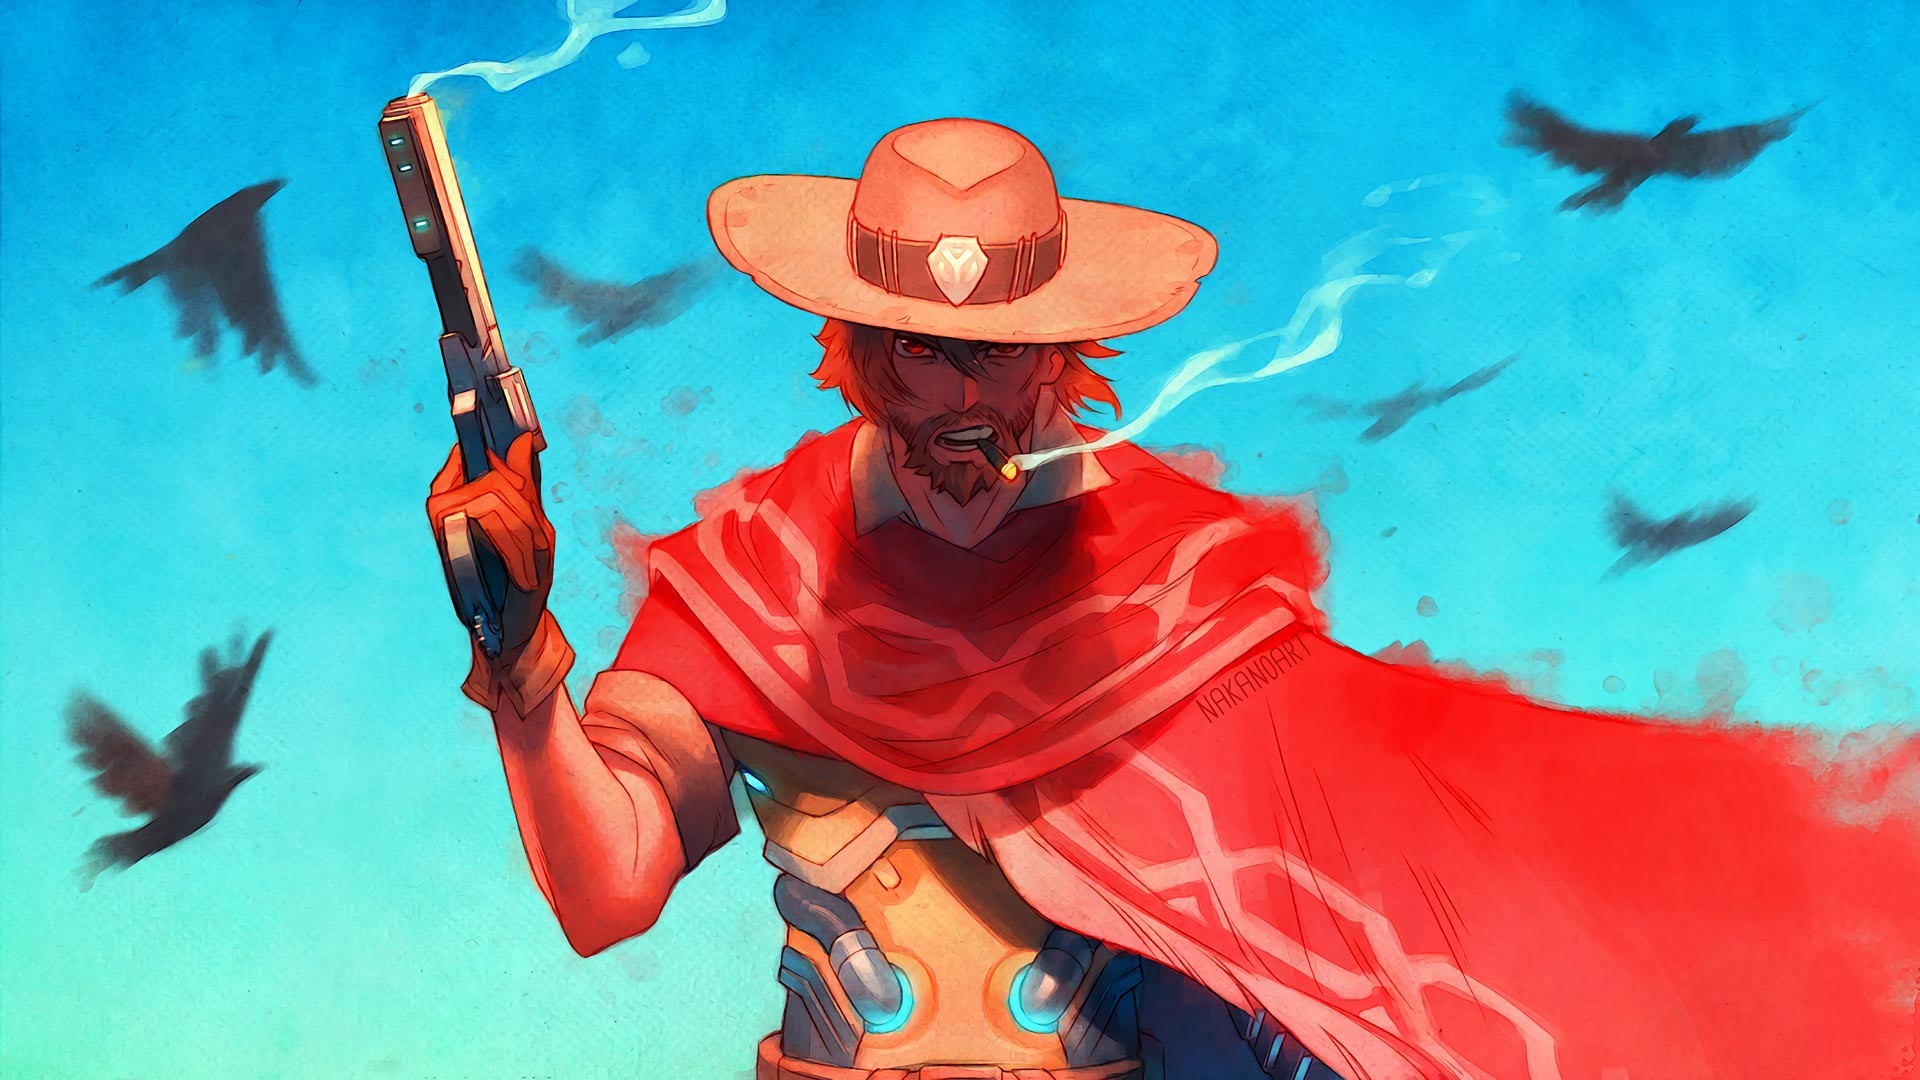 1920x1080 ... McCree. Featuring great artwork of the western outlaw with his trusty  six-shooter. In action, keeping peace and dealing out justice on the  enemies with ...